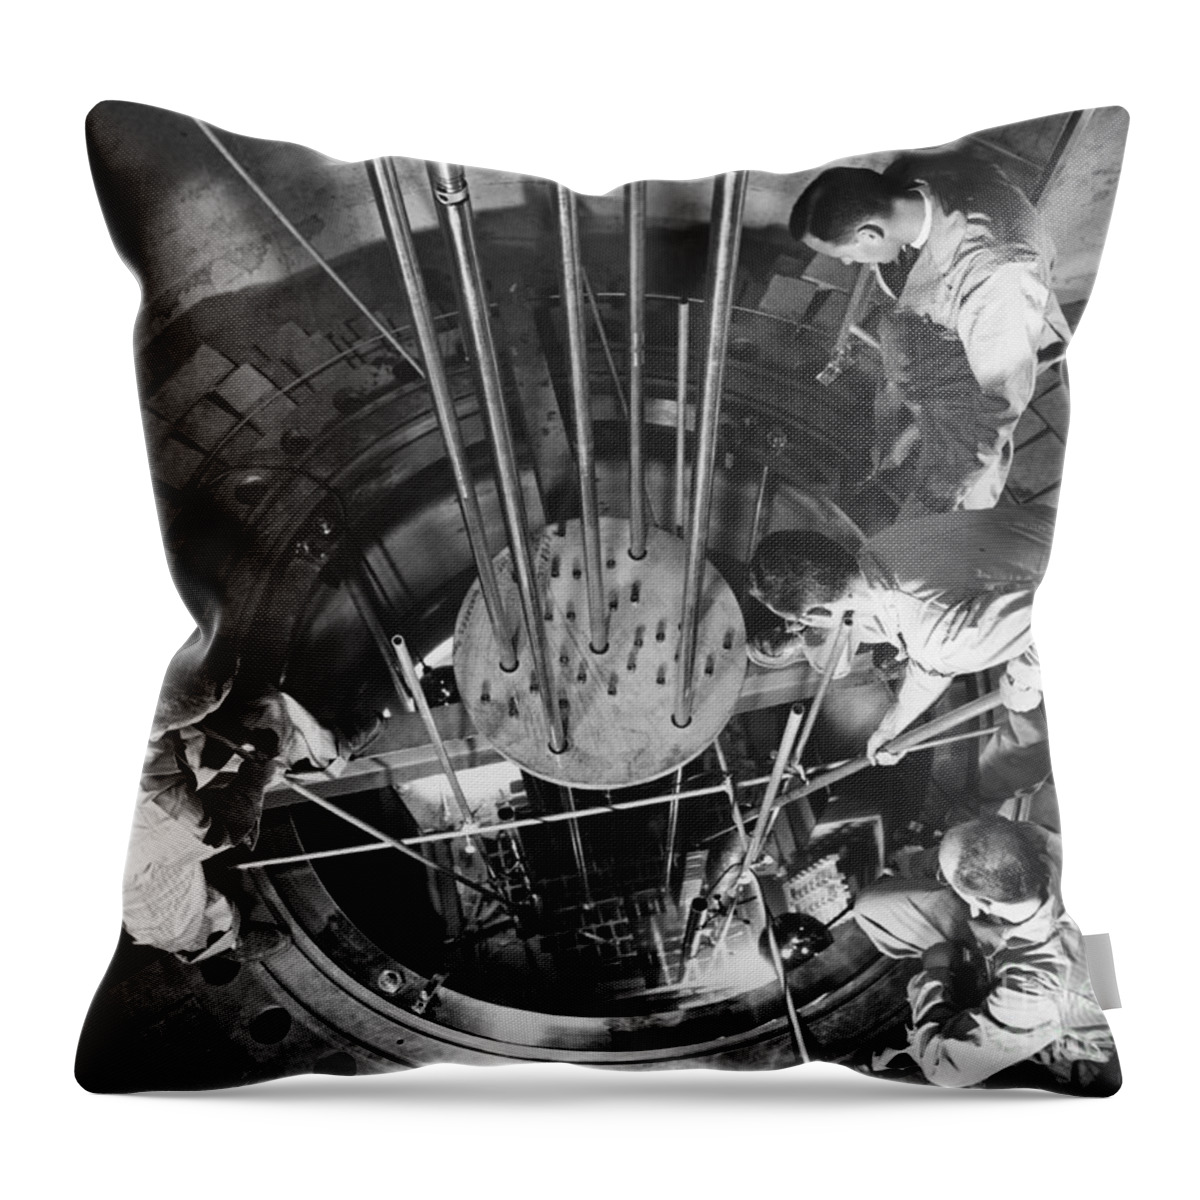 Nuclear Throw Pillow featuring the photograph Vallecitos Nuclear Center, C. 1960 by News Bureau, General Electric Company